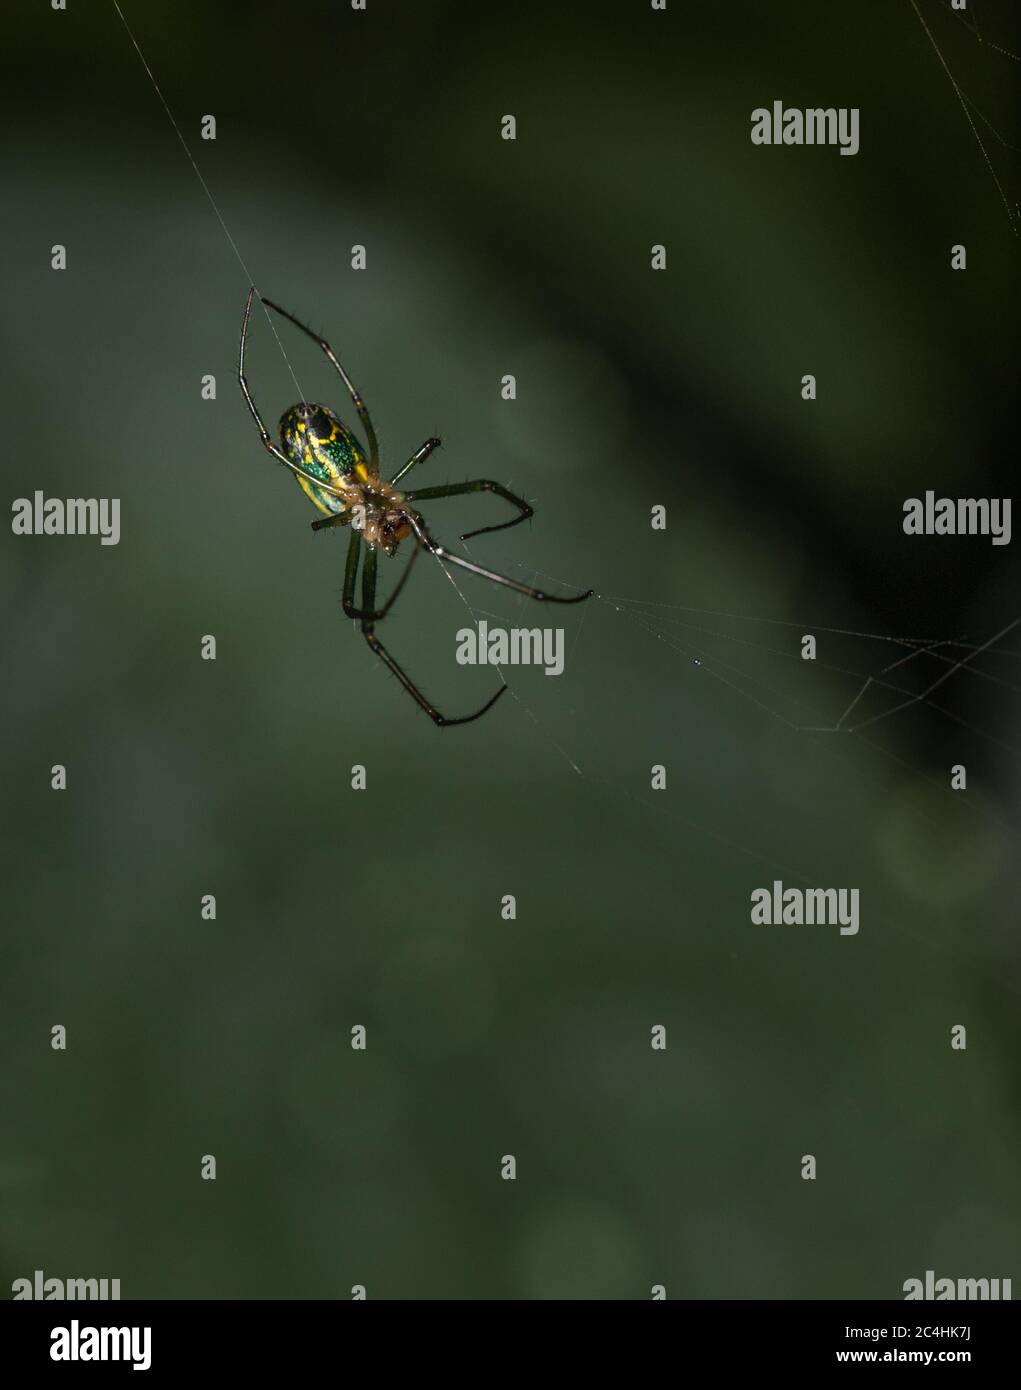 An Orchard Orbweaver spider dangles in mid-air while spinning its silken web Stock Photo